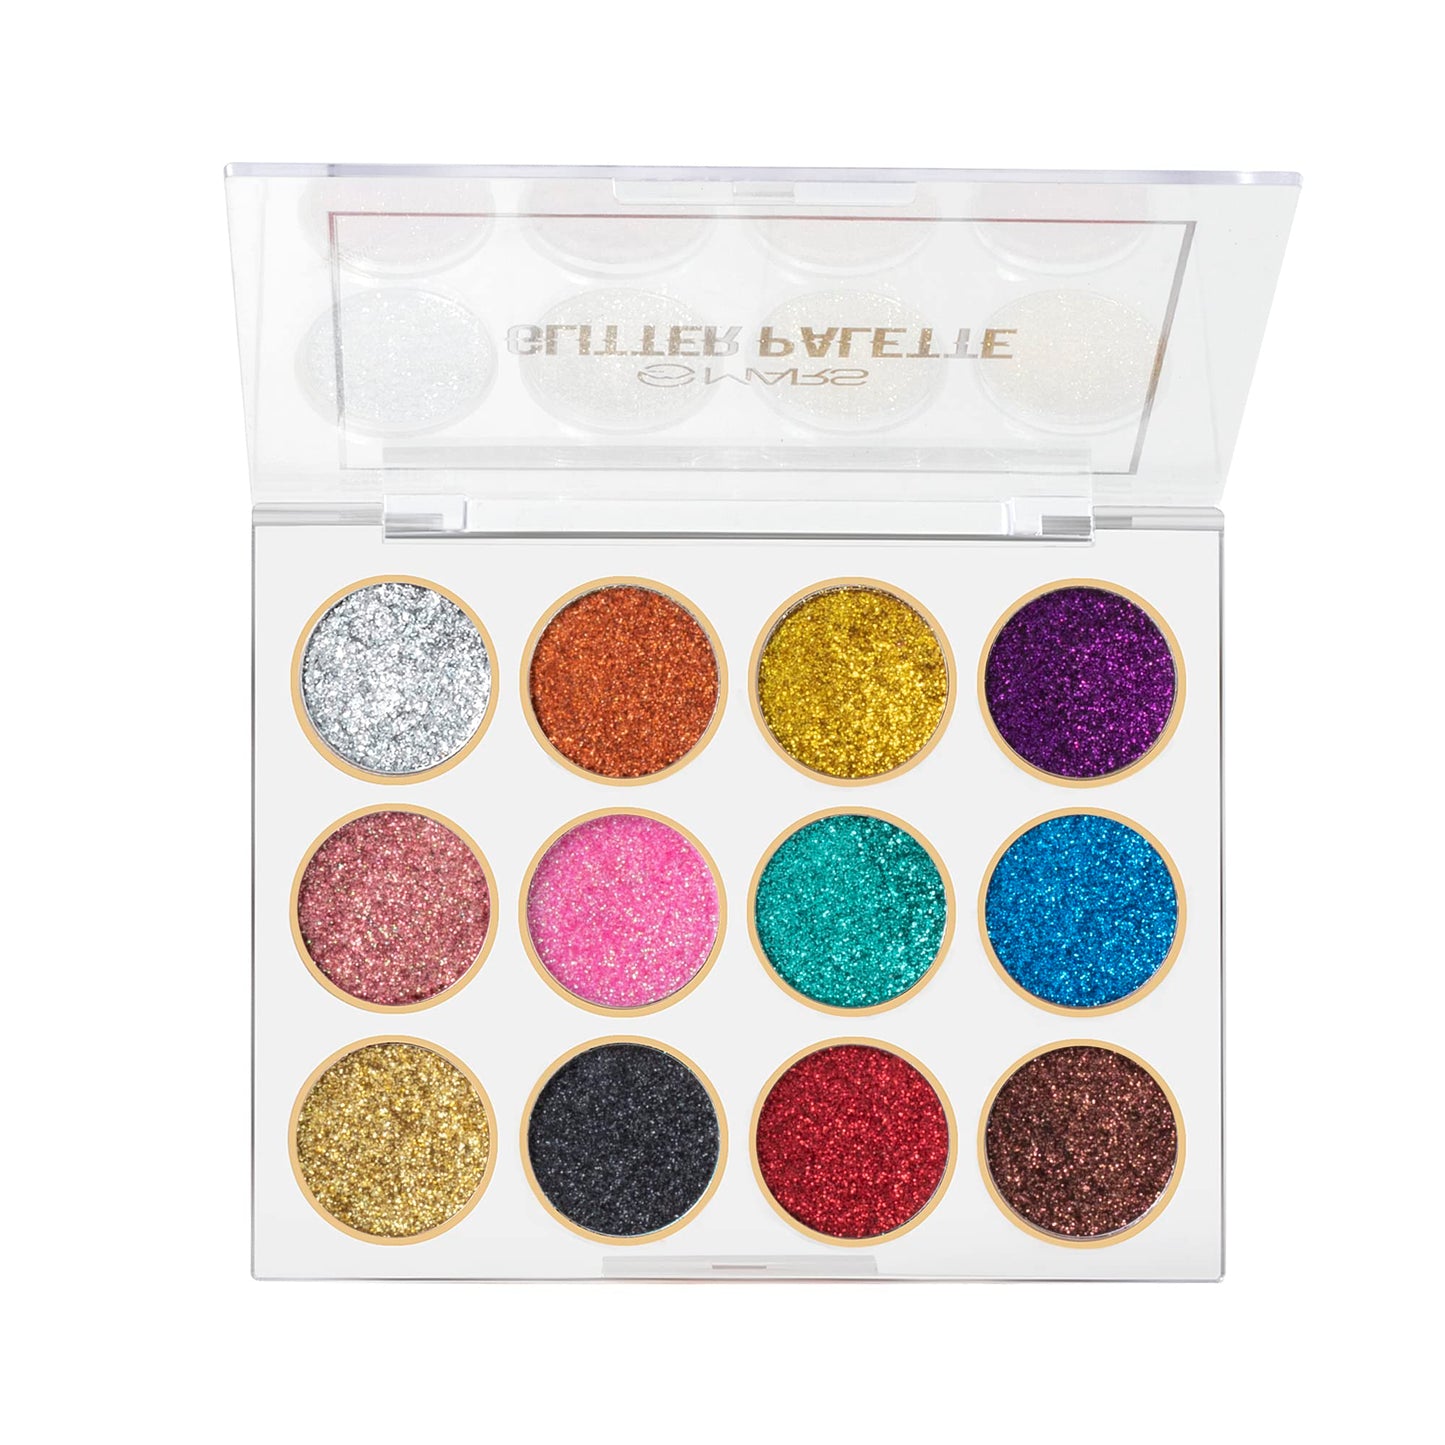 MARS 12 Shade Ultra Pigmented Glitter High Shine Eyeshadow Palette 12 g (Shade-01) | Long wearing and Easily Blendable Eye makeup Palette